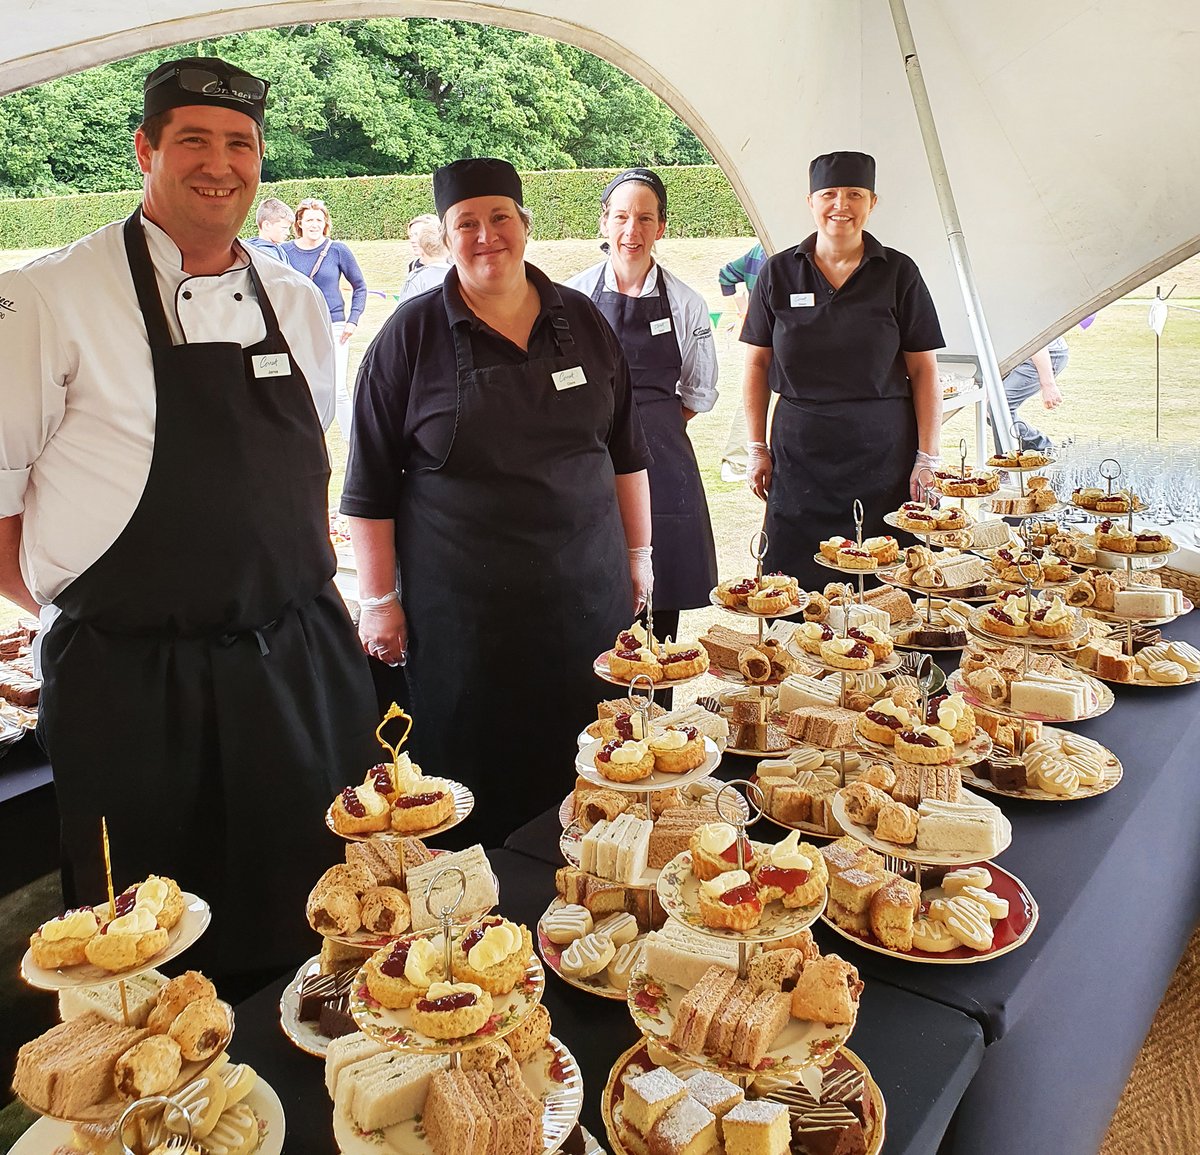 Are you getting the support you deserve? Choose a catering company who deliver what they say - Connect has the awards to prove it. Contact us T: 01491 826000 or E: sales@connectcatering.co.uk
#connectcatering #contractcatering #foodie #cateringsupport #independentschoolcatering